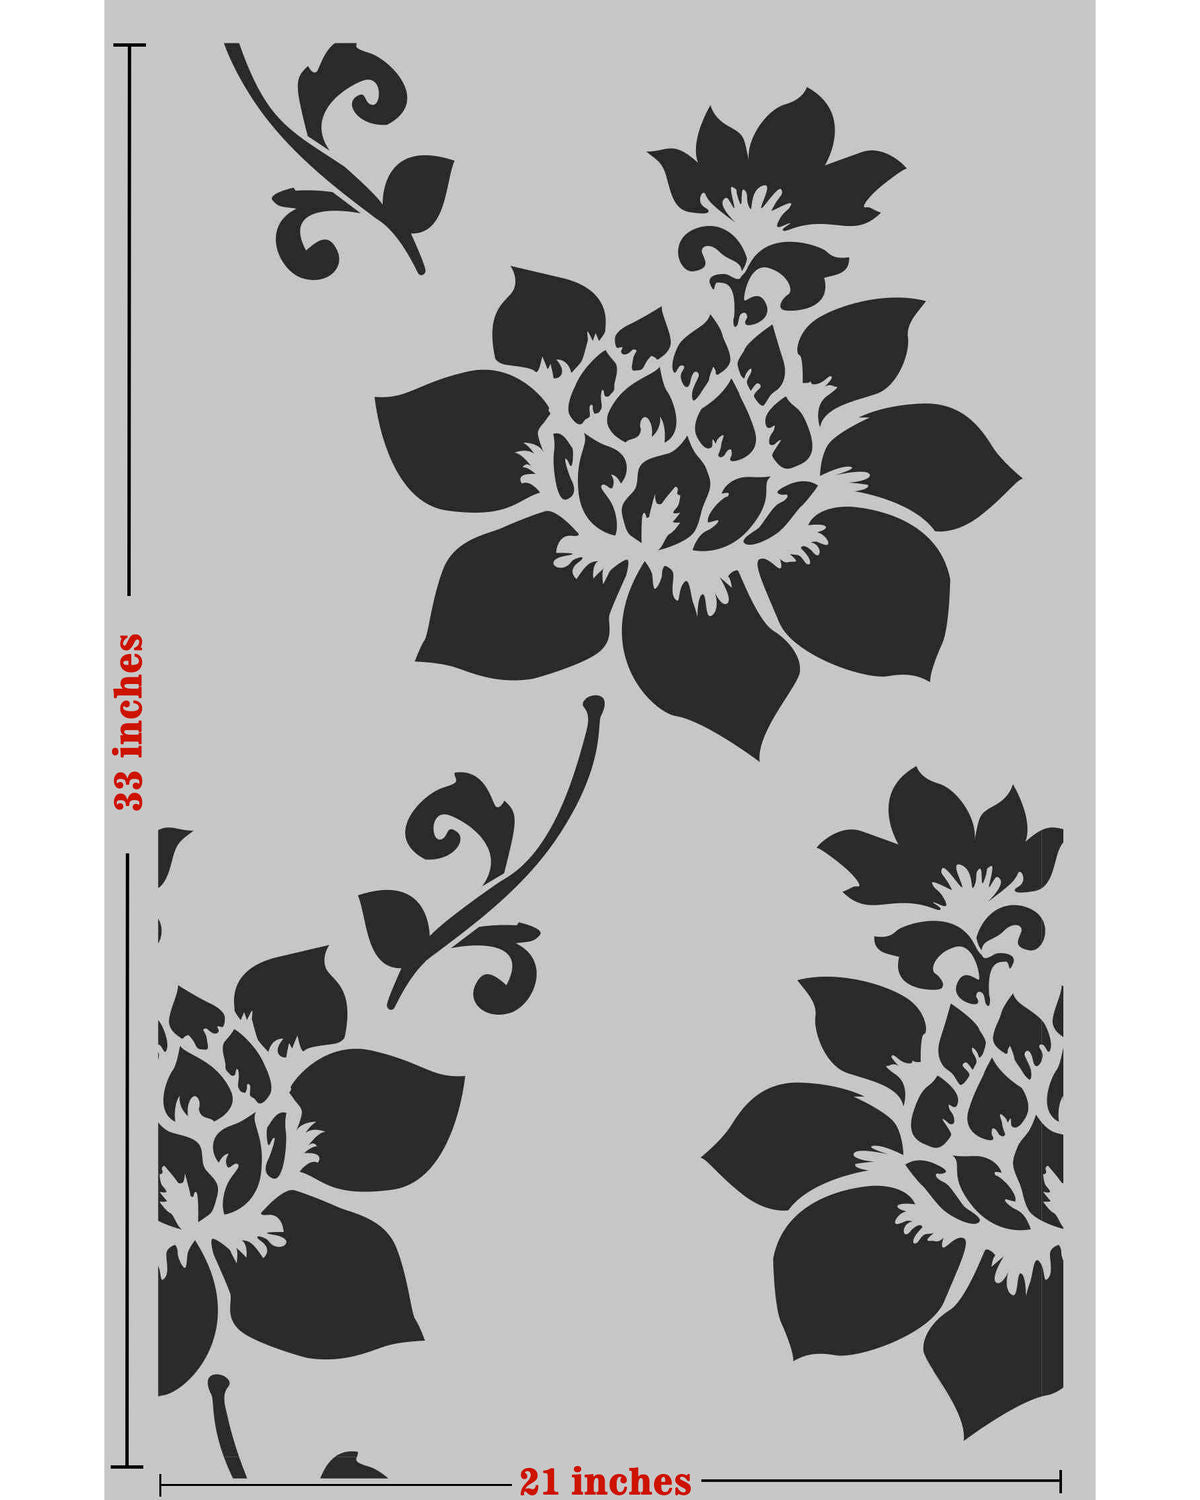 Buy Large Flower Wall Stencil for Paintings |Reusable Floral Stencils, Paintings on Walls, Floor | CrafTreat